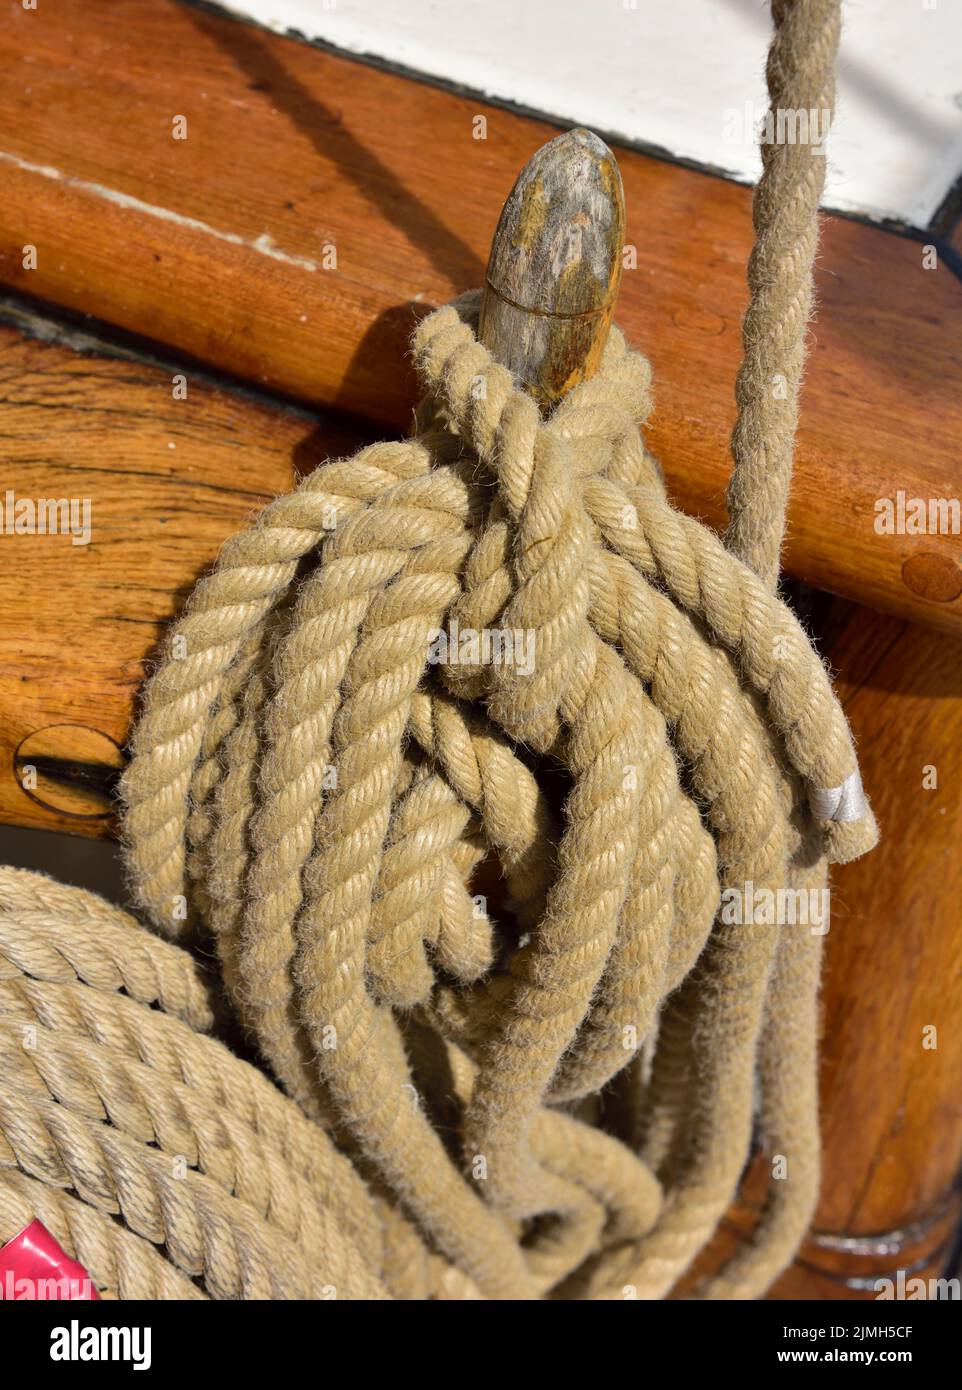 Rope coiled around traditional wooden cleat, peg, on sailing vessel Stock Photo